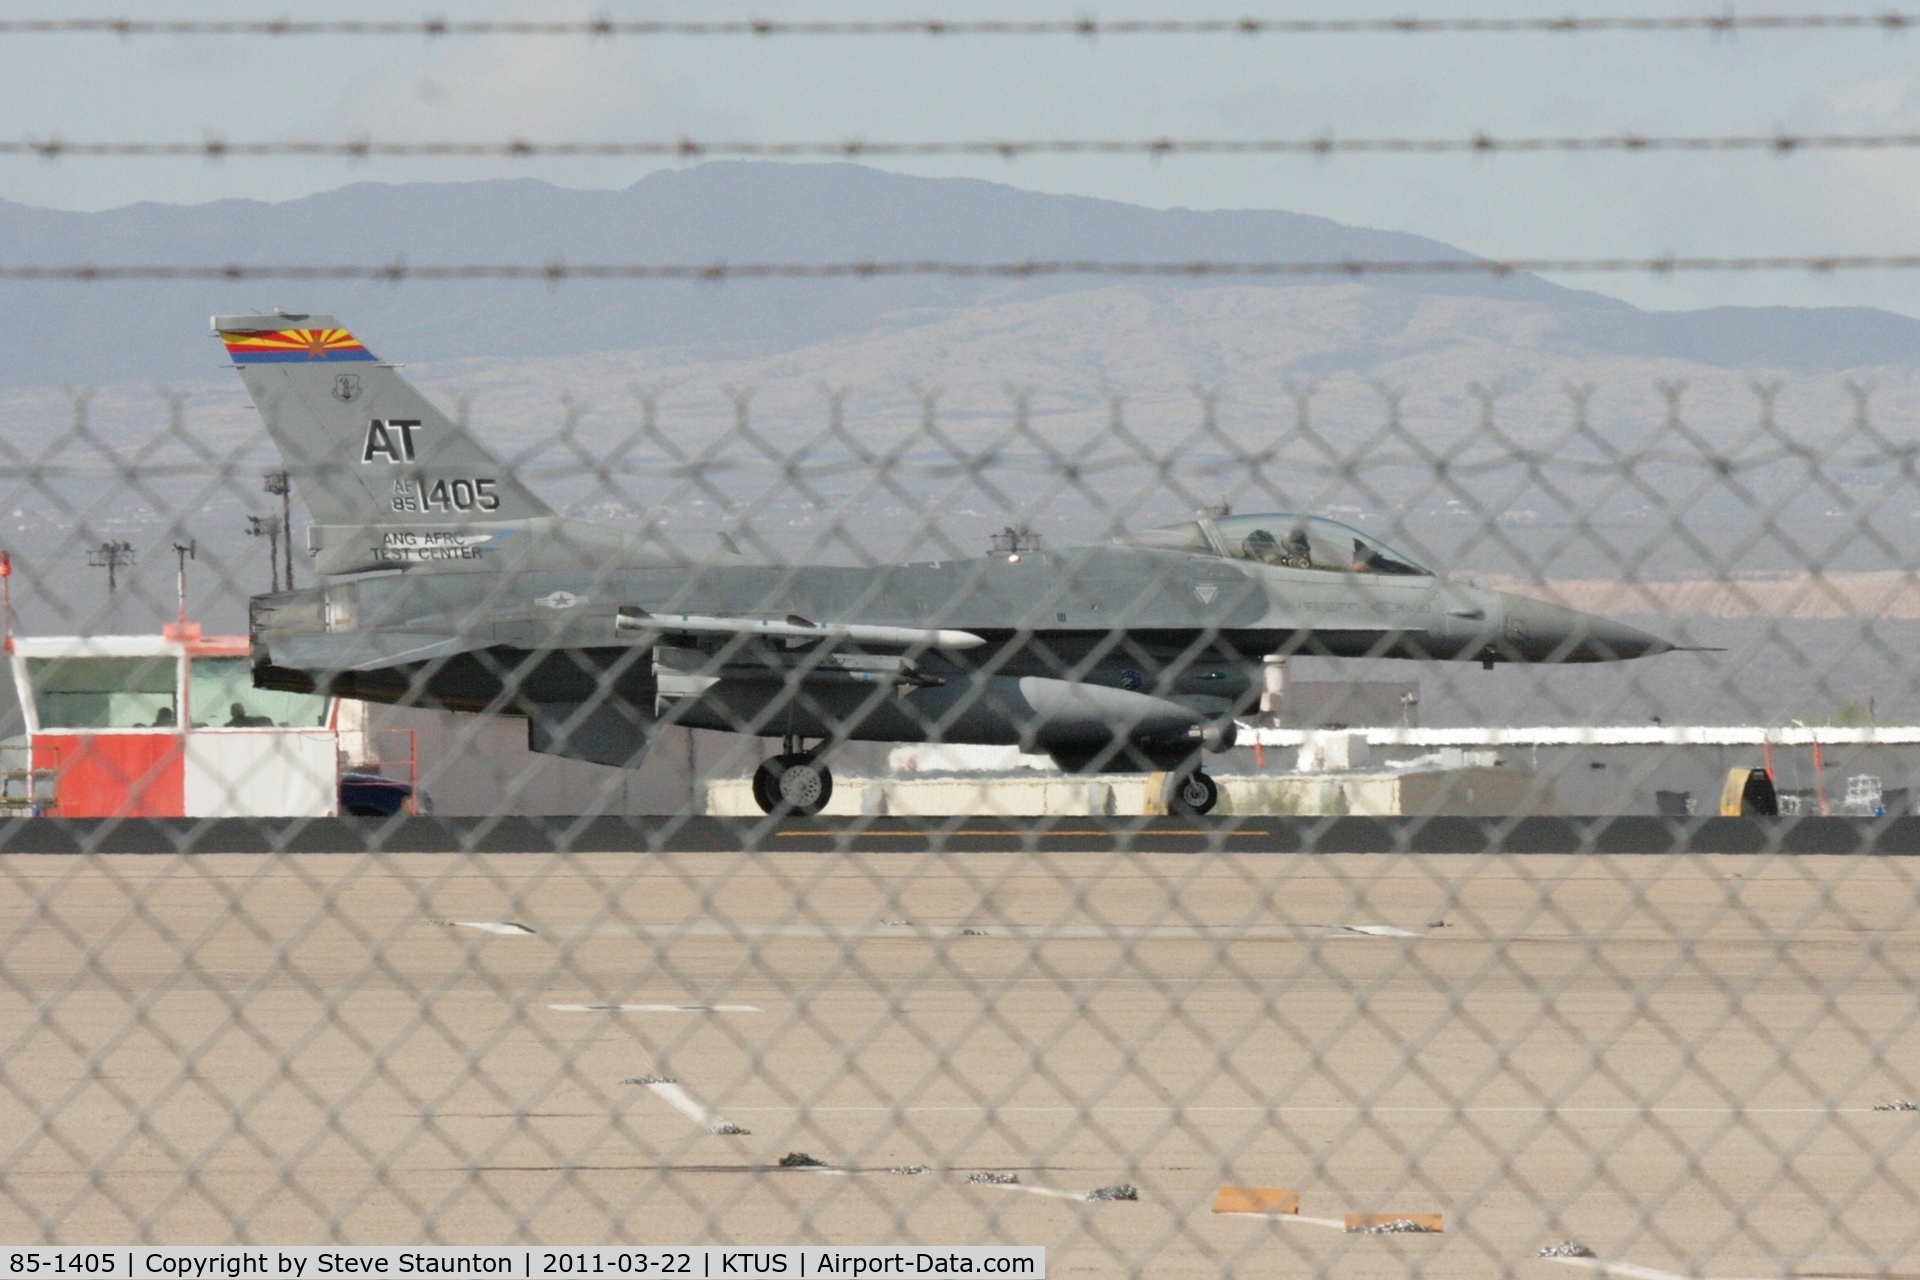 85-1405, 1985 General Dynamics F-16C C/N 5C-185, Taken at Tucson International Airport, in March 2011 whilst on an Aeroprint Aviation tour